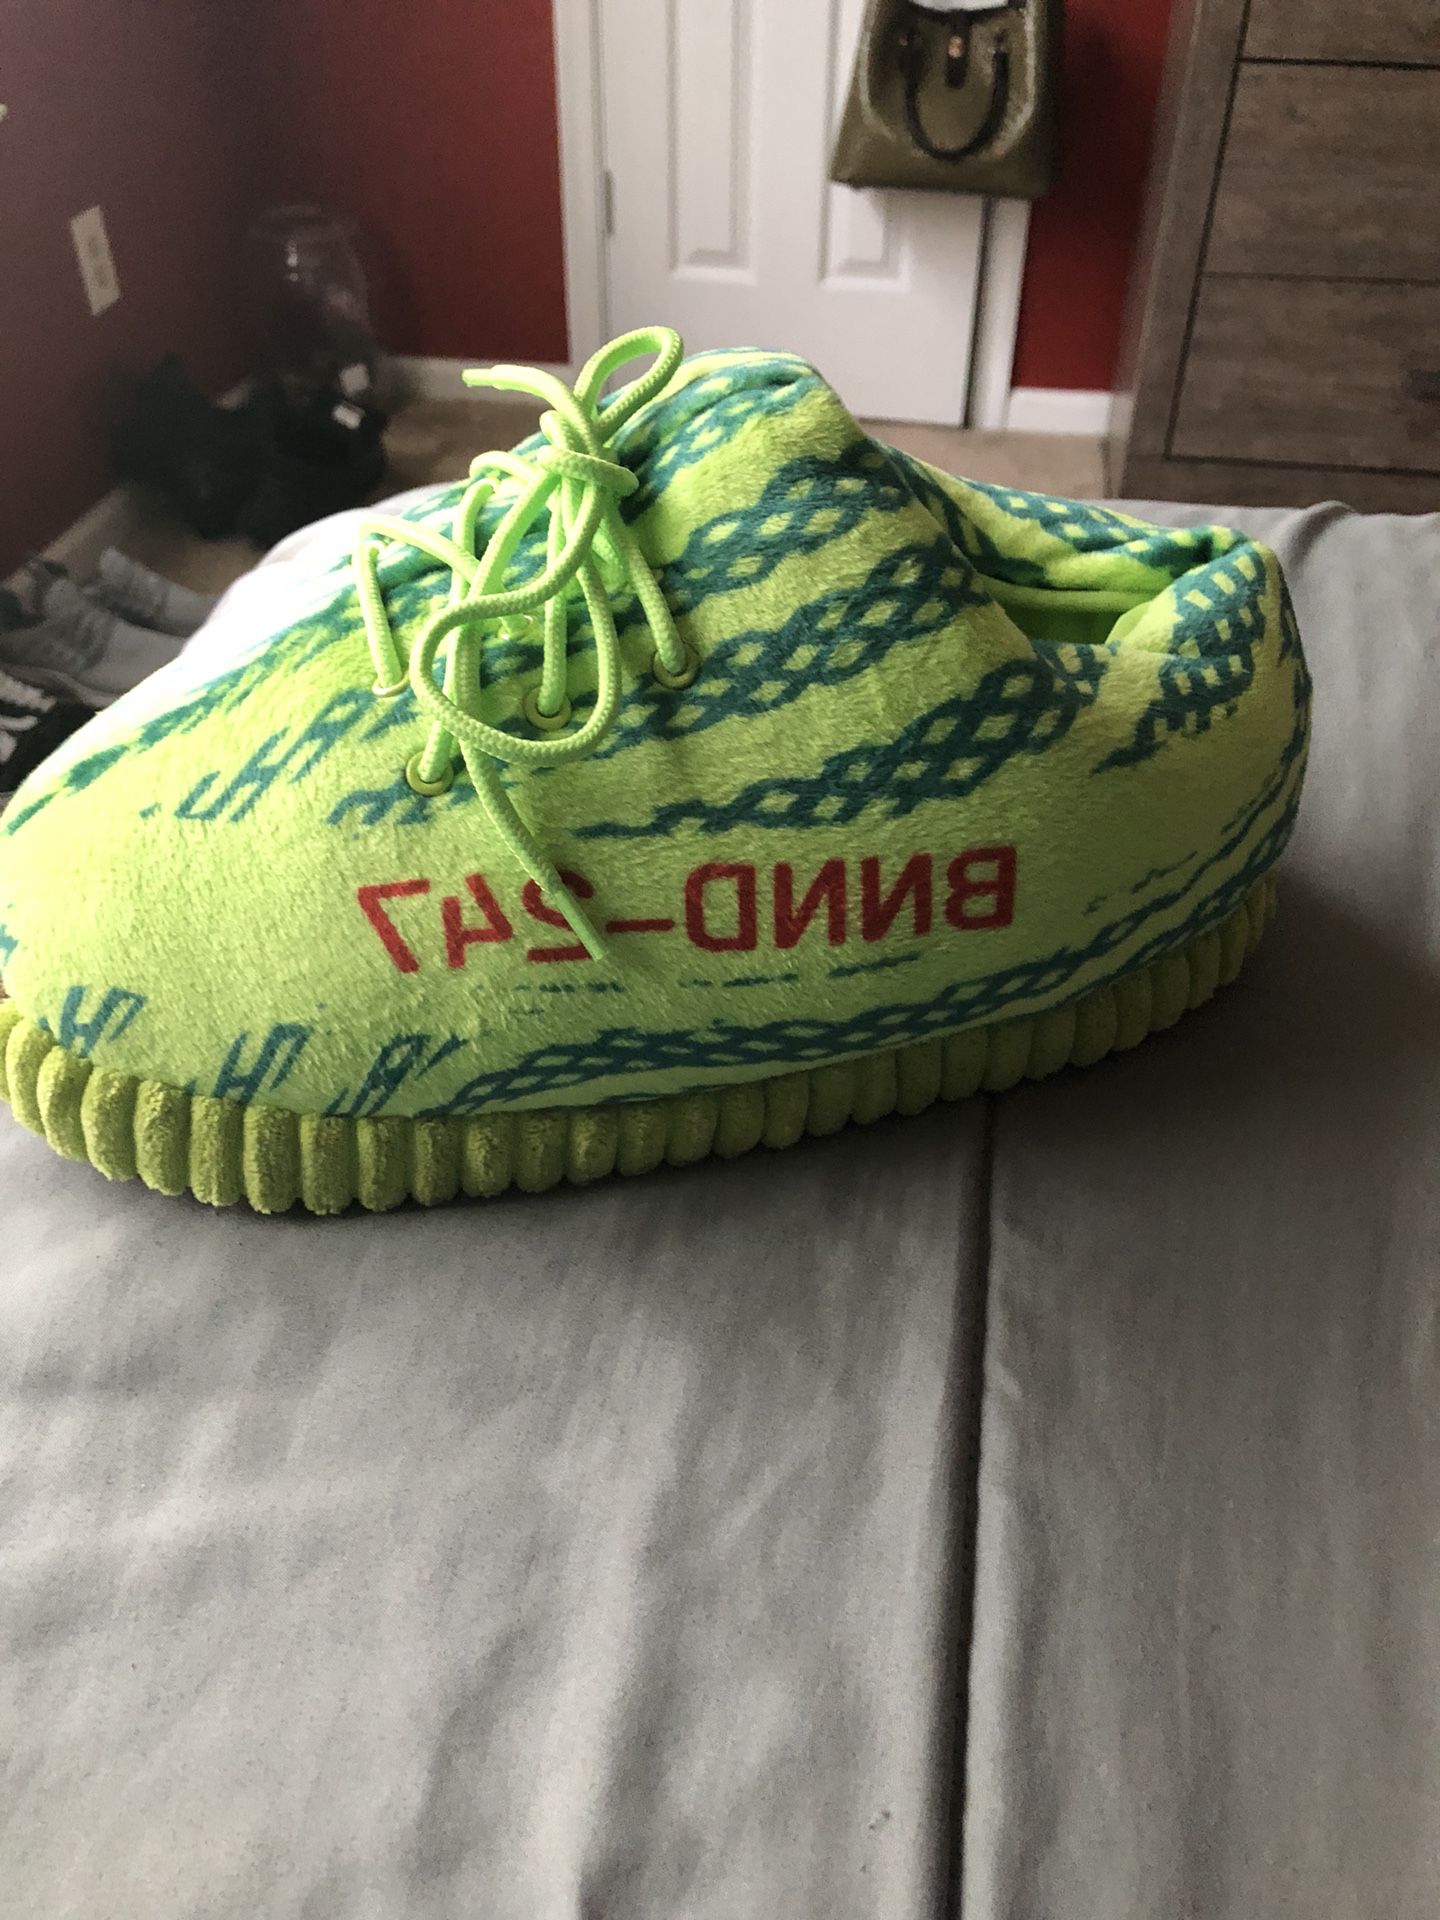 New YEEZY slippers for Sale in Chesapeake, VA - OfferUp